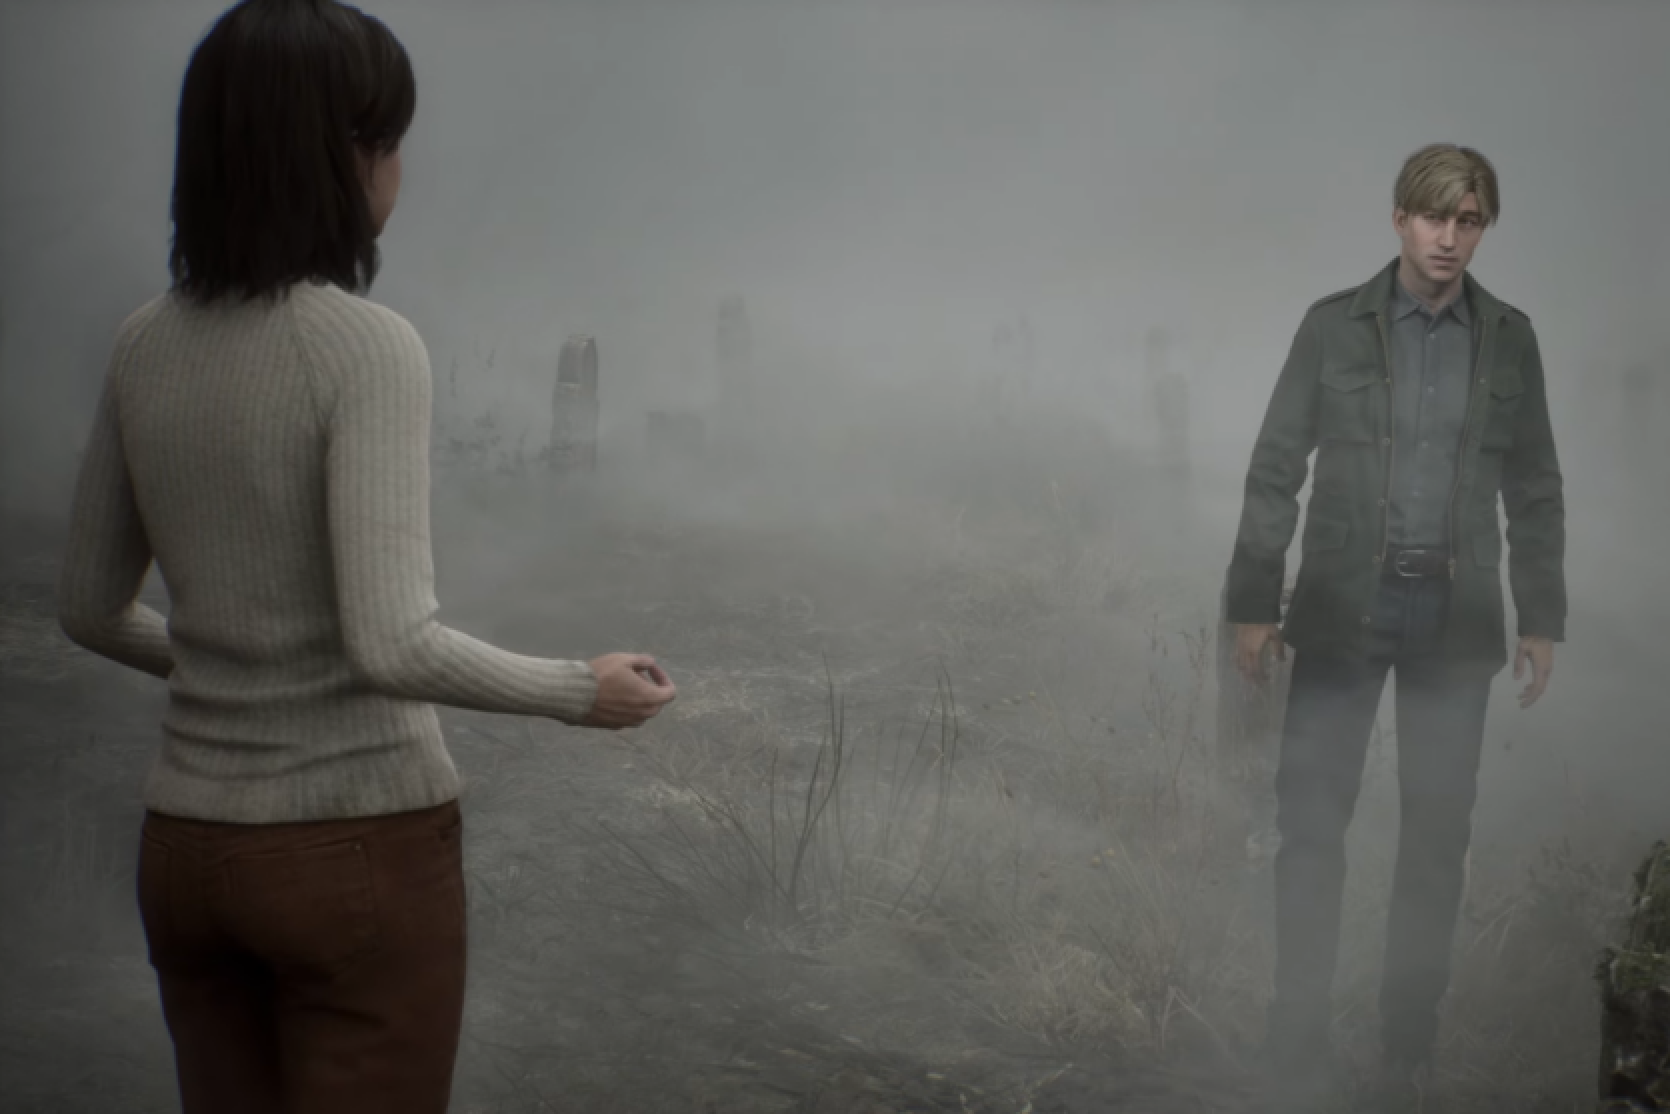 Silent Hill 2 remake trailer and 13 minutes of gameplay - the game will be released on October 8 on PlayStation 5 and PC